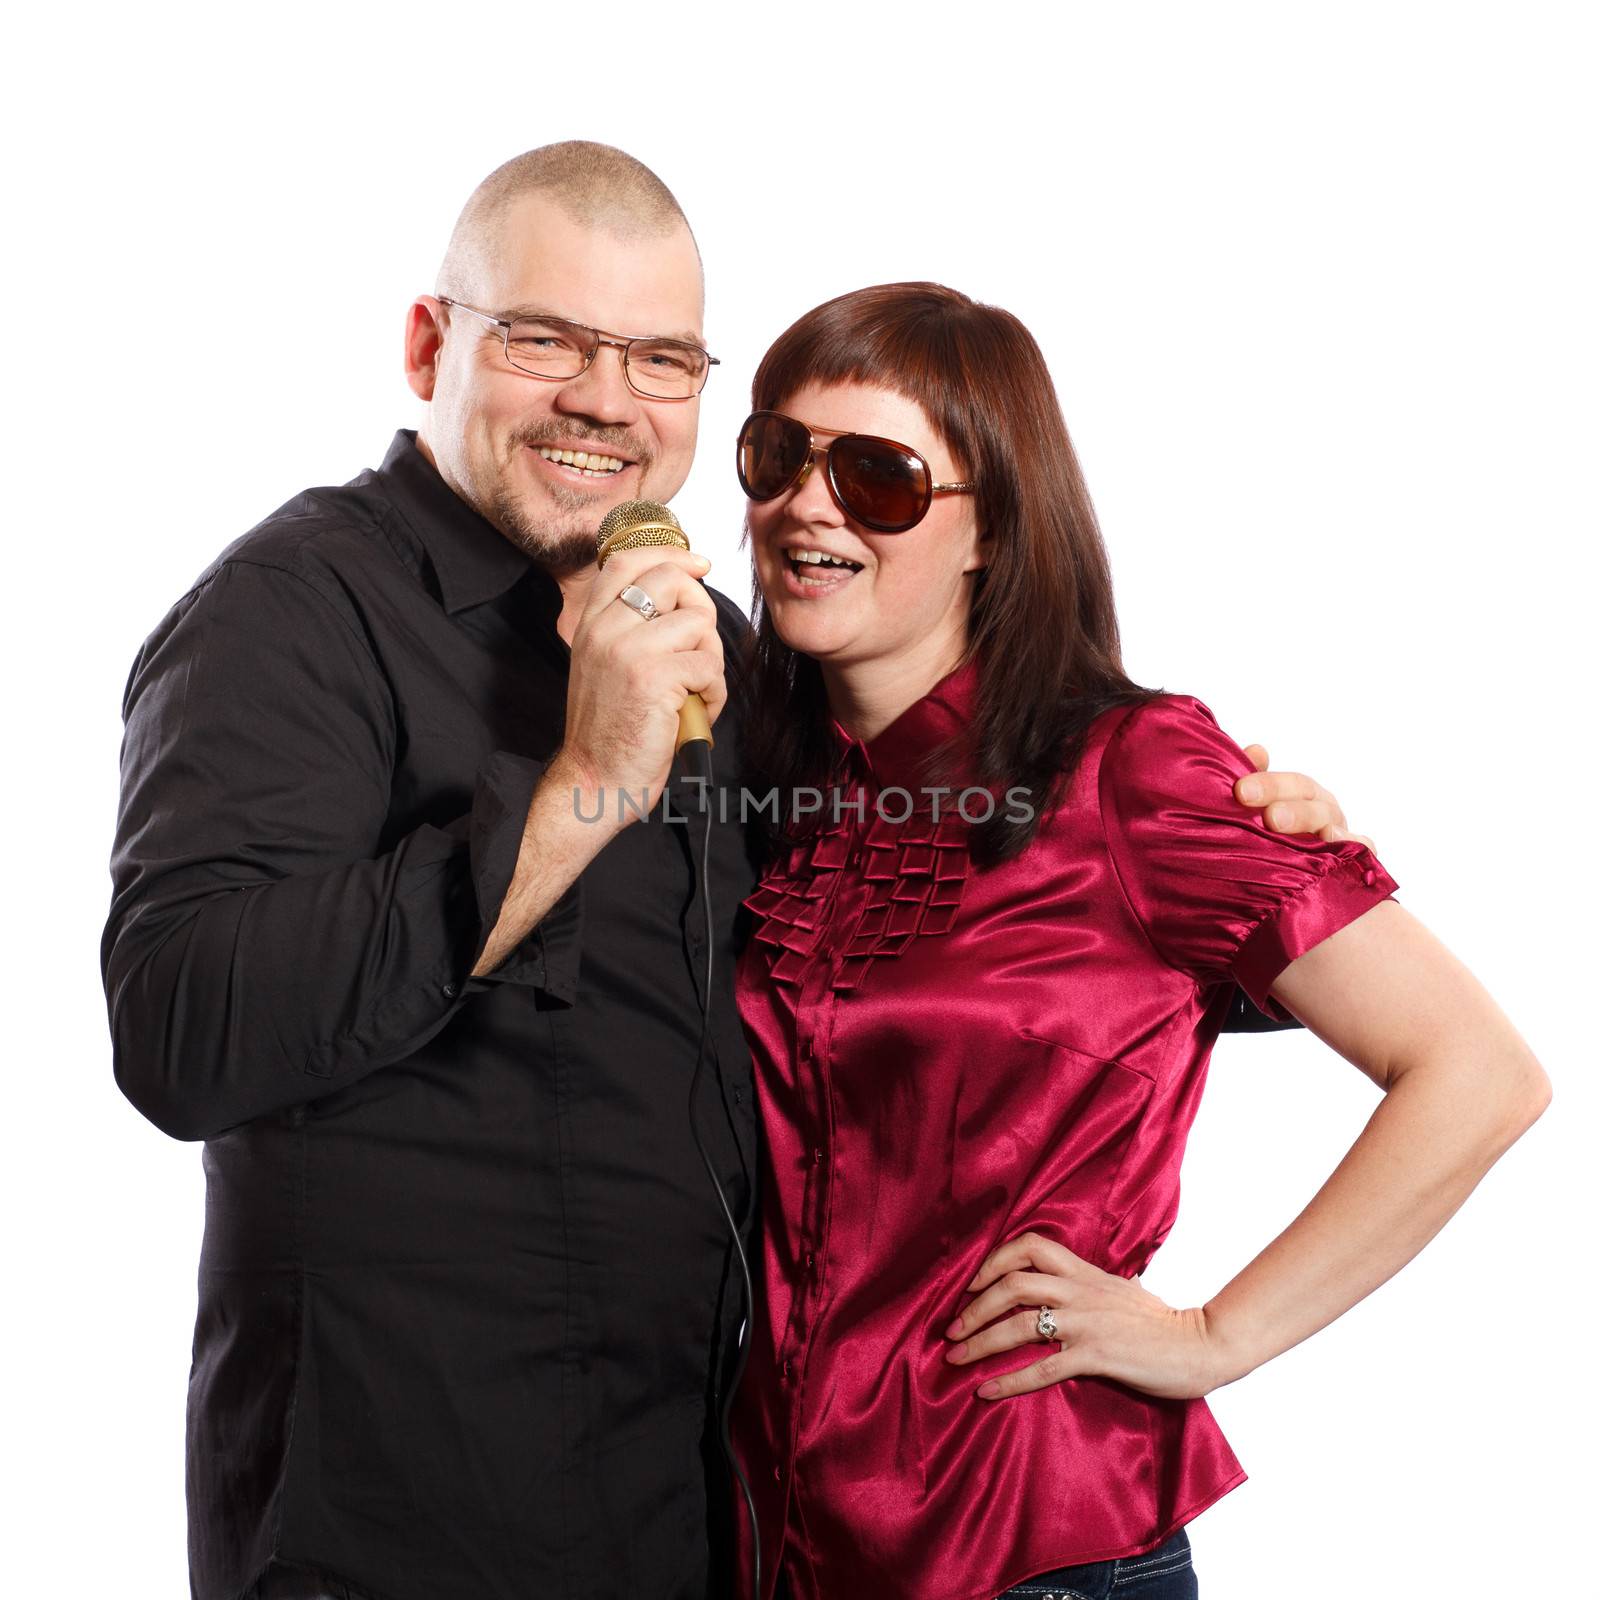 smiling couple sings into a microphone on a white background